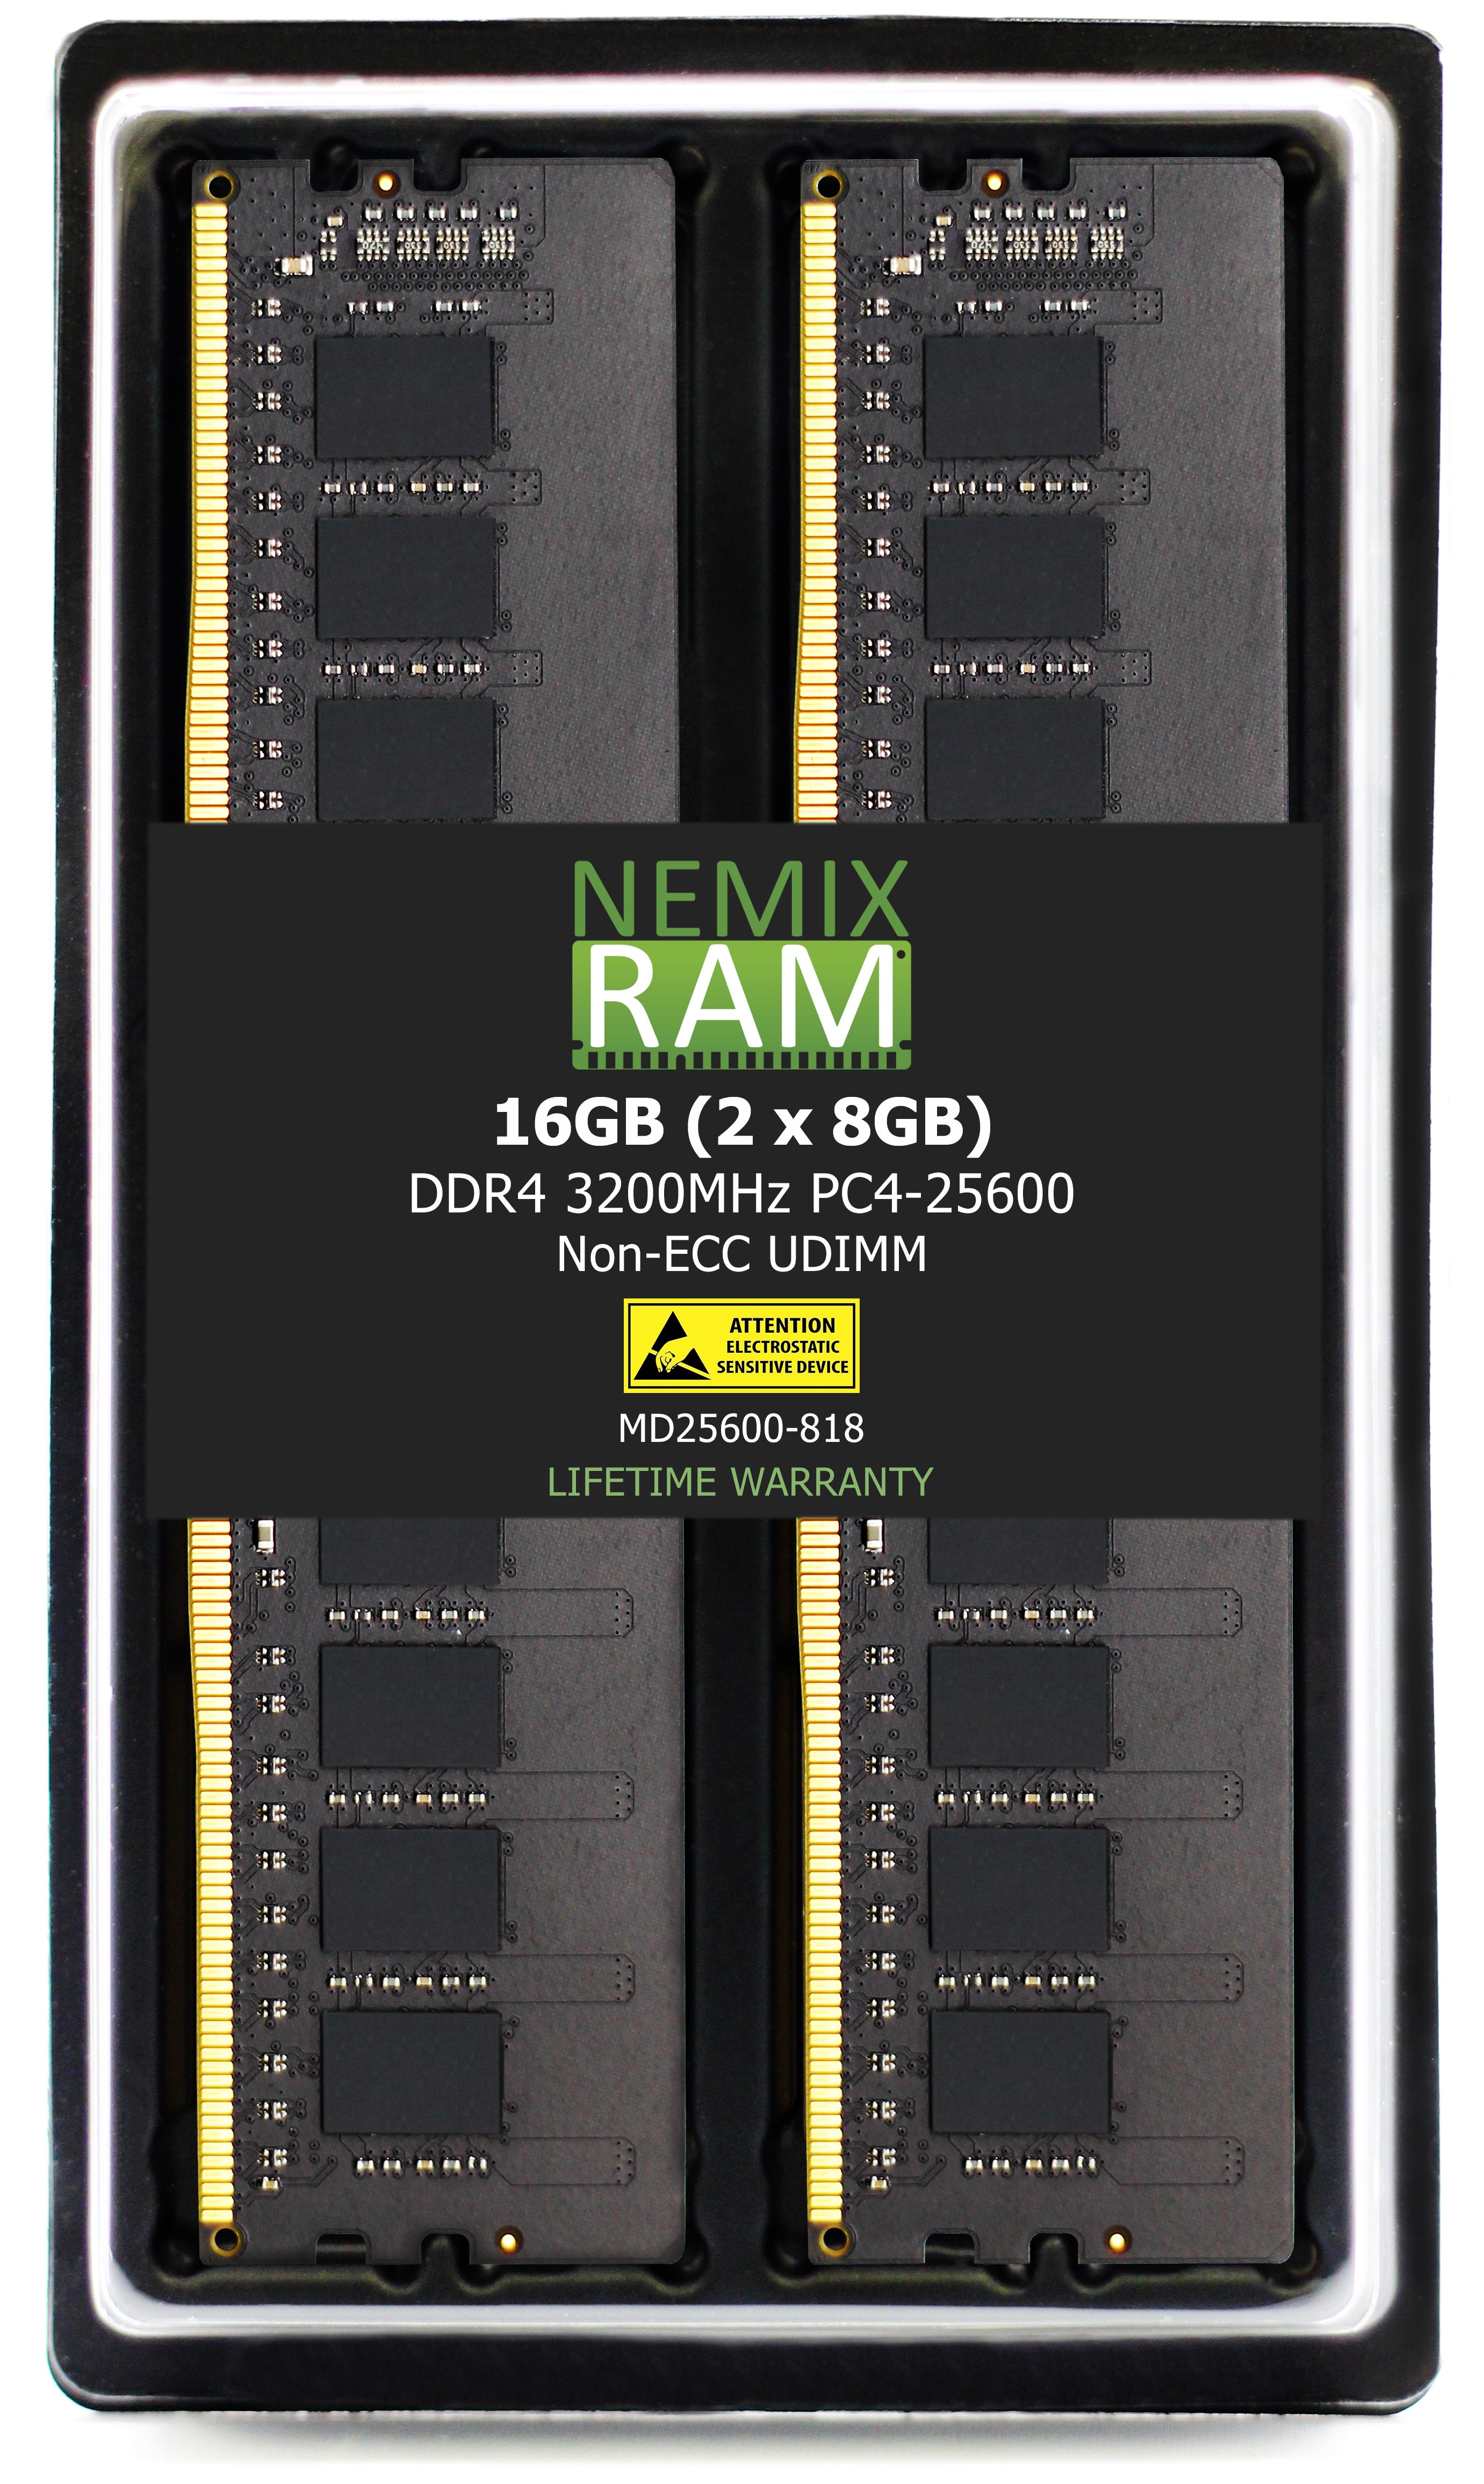 QNAP RAM-8GDR4T0-UD-3200 8GB DDR4 3200MHz PC4-25600 UDIMM 1Rx8 Compatible Memory